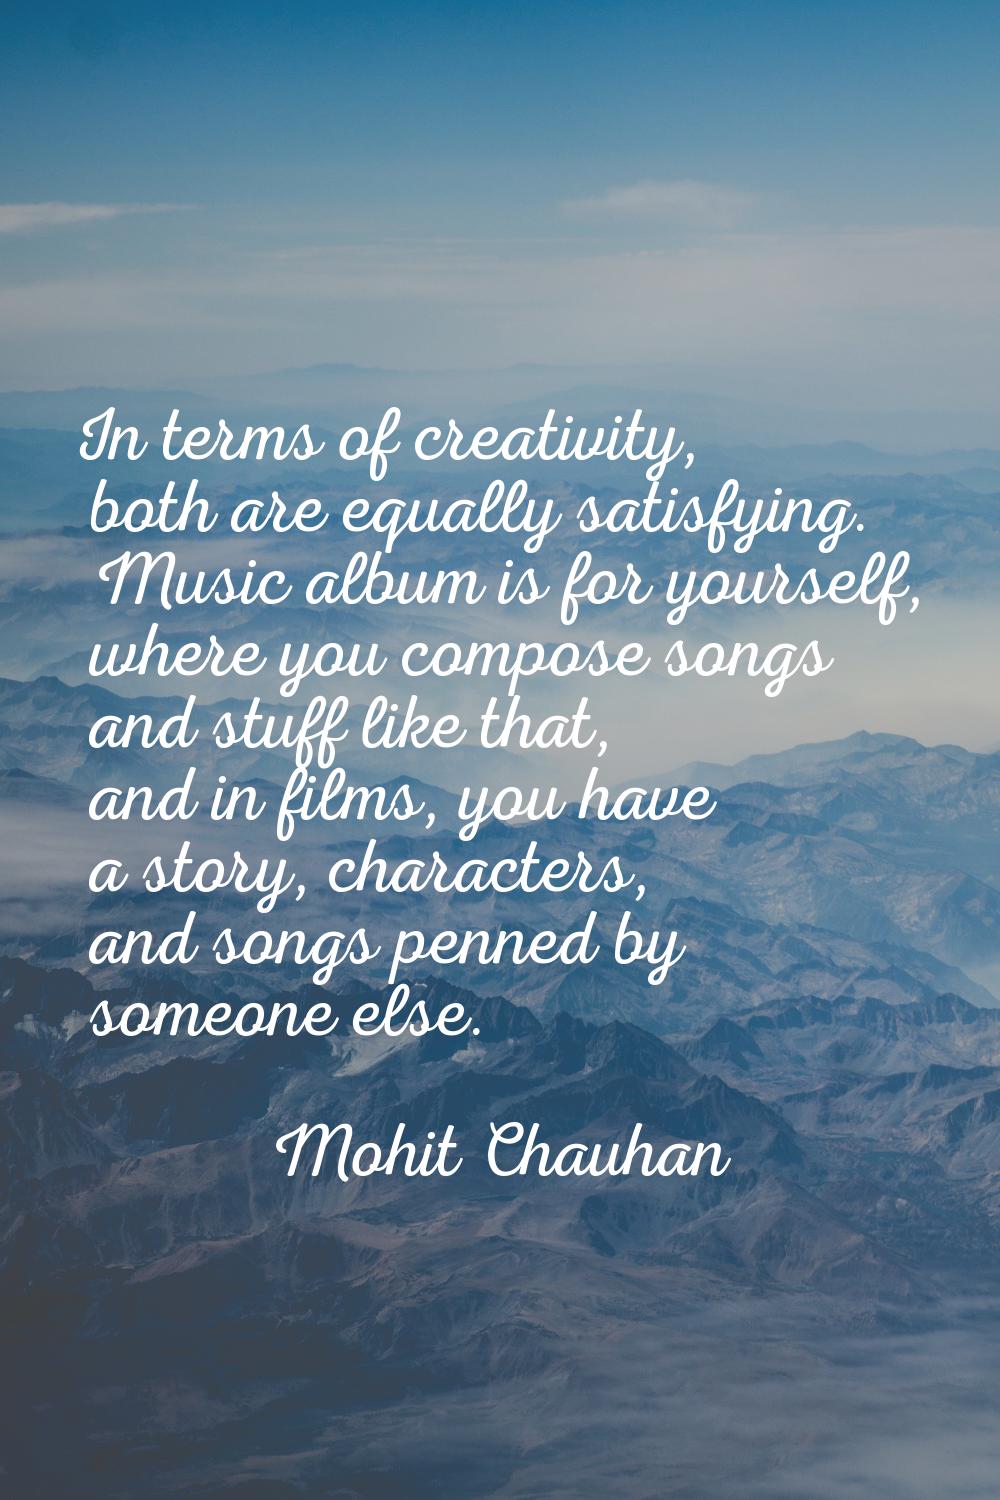 In terms of creativity, both are equally satisfying. Music album is for yourself, where you compose